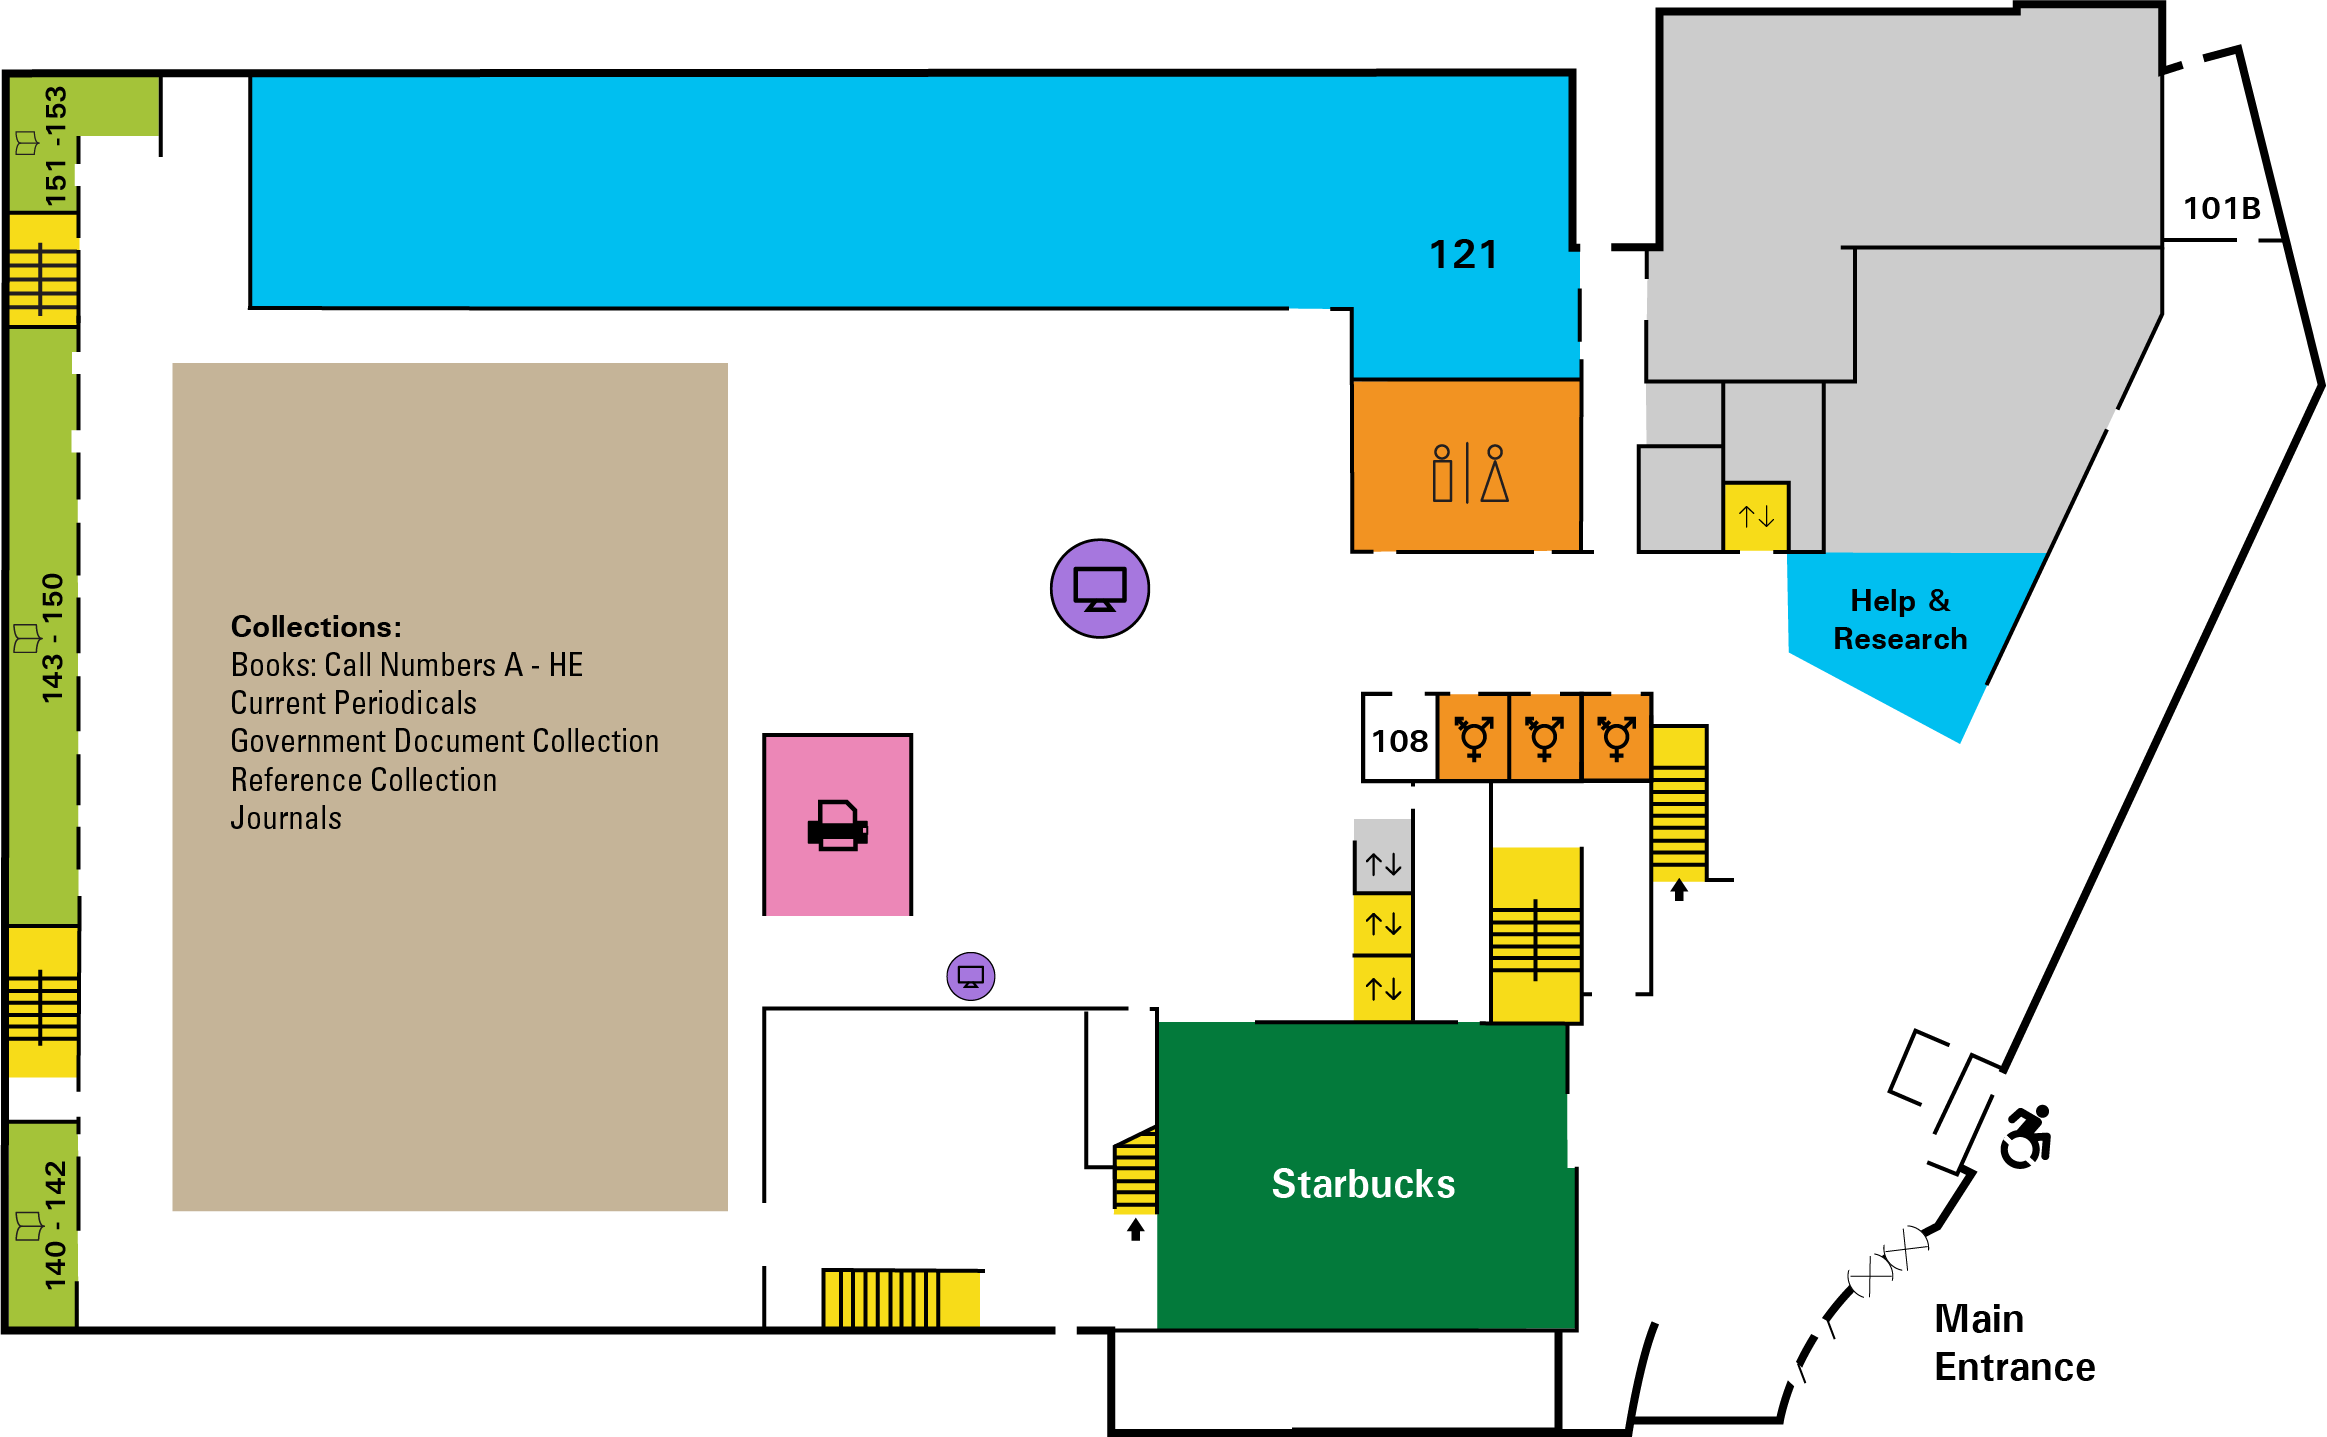 Floor map of the first floor of Cabell Library